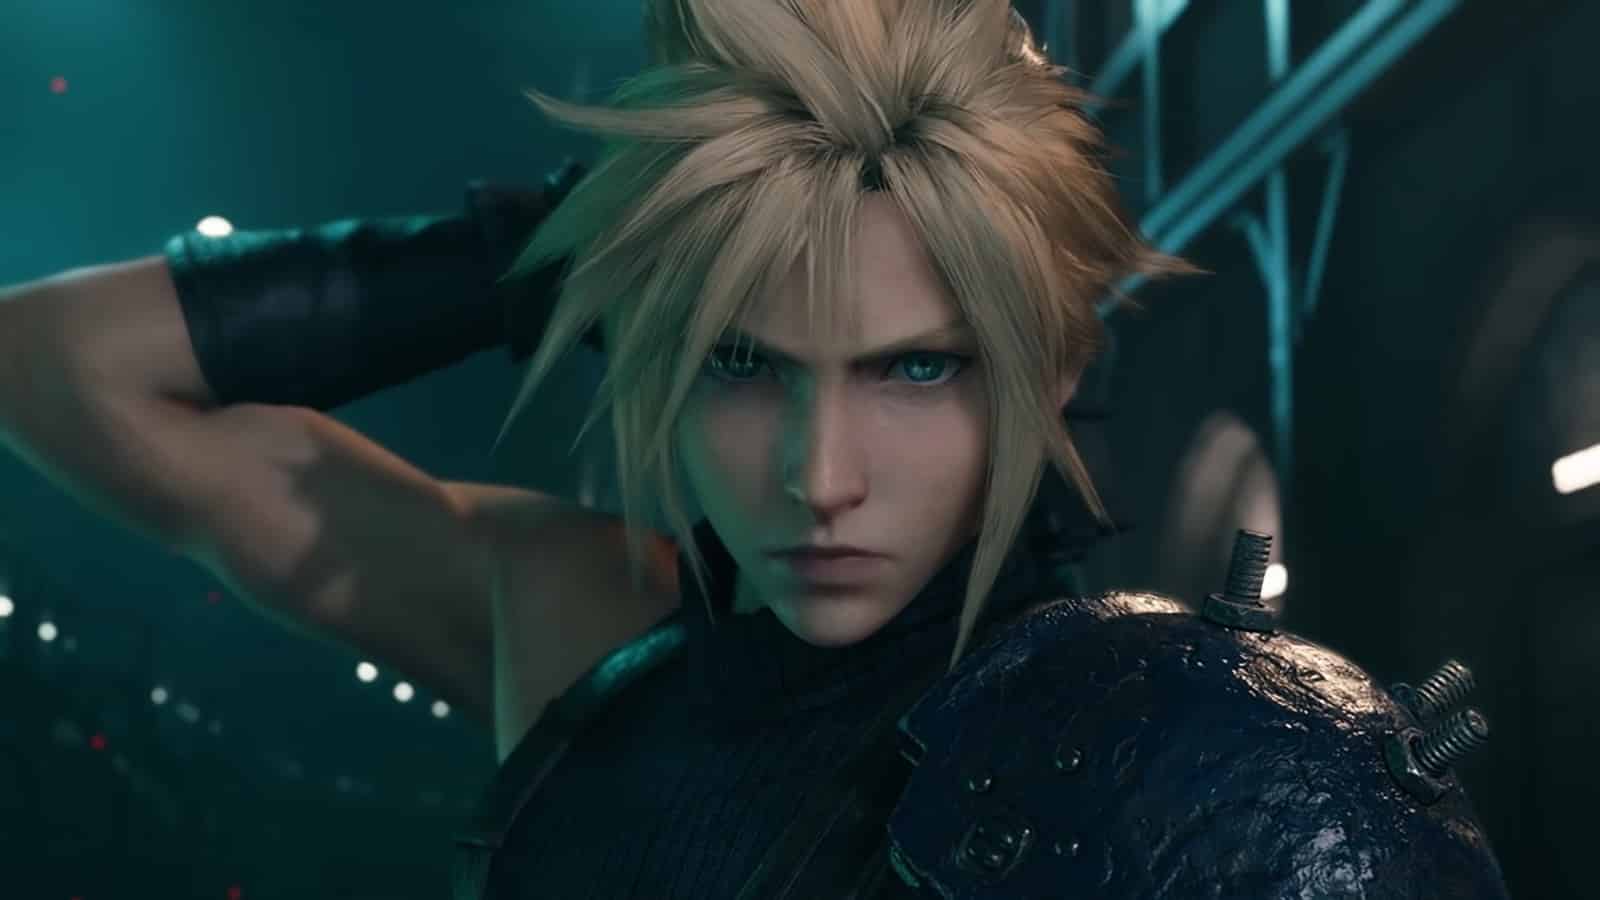 Final Fantasy 7 Remake Is A Clearly A Sequel. Here's Why